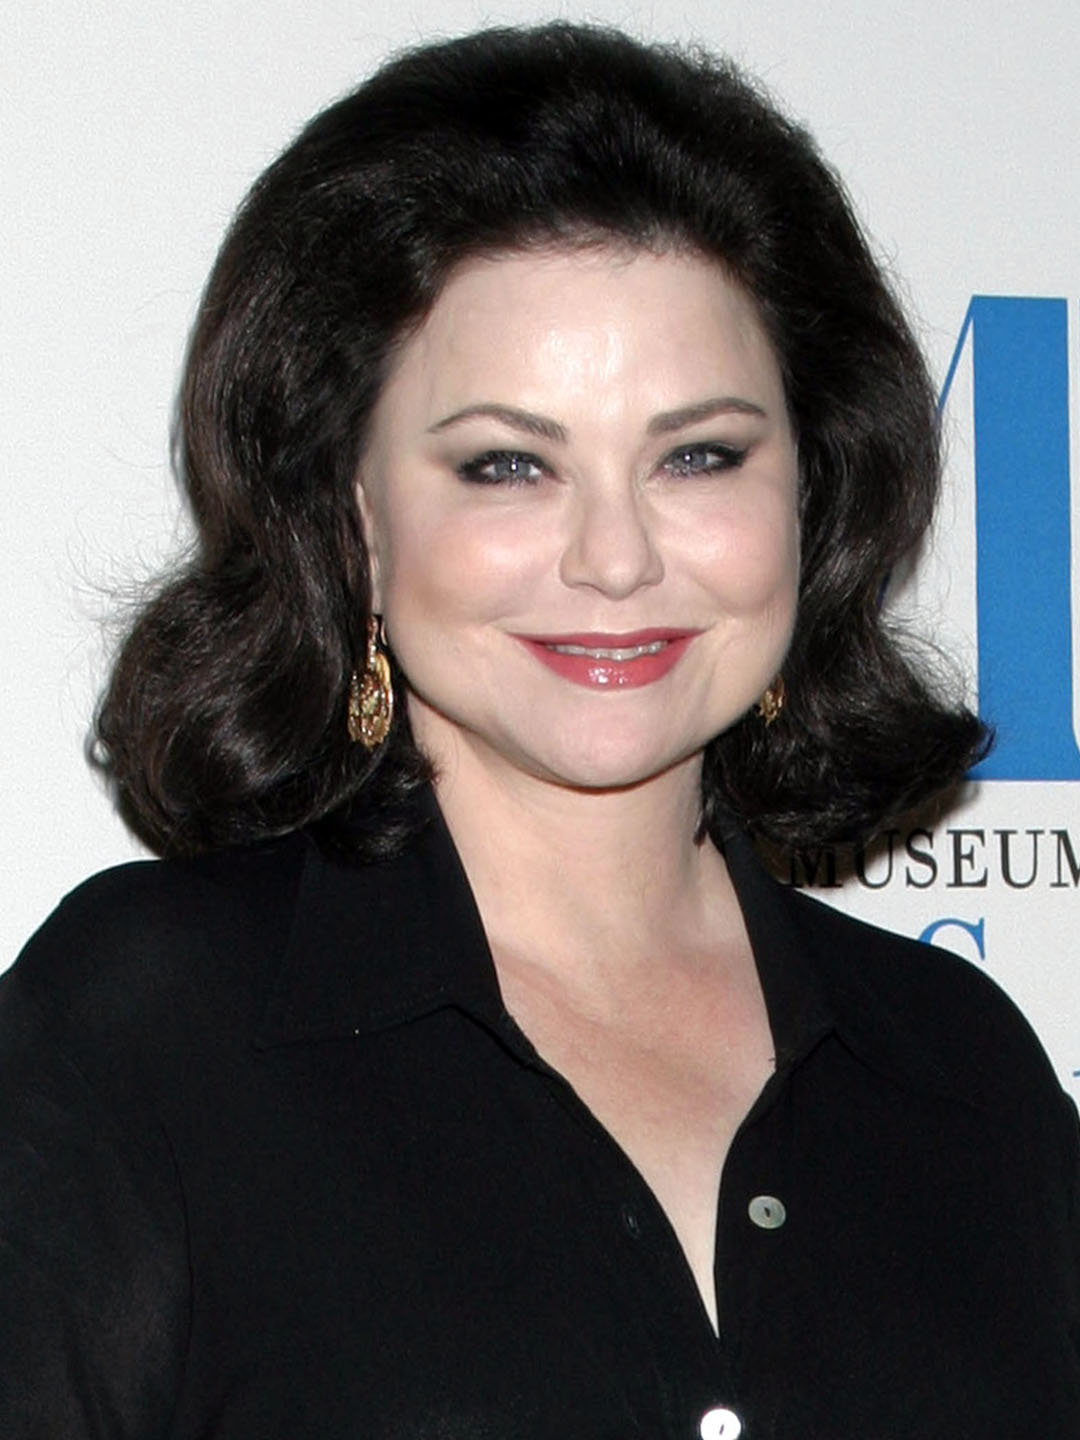 How tall is Delta Burke?